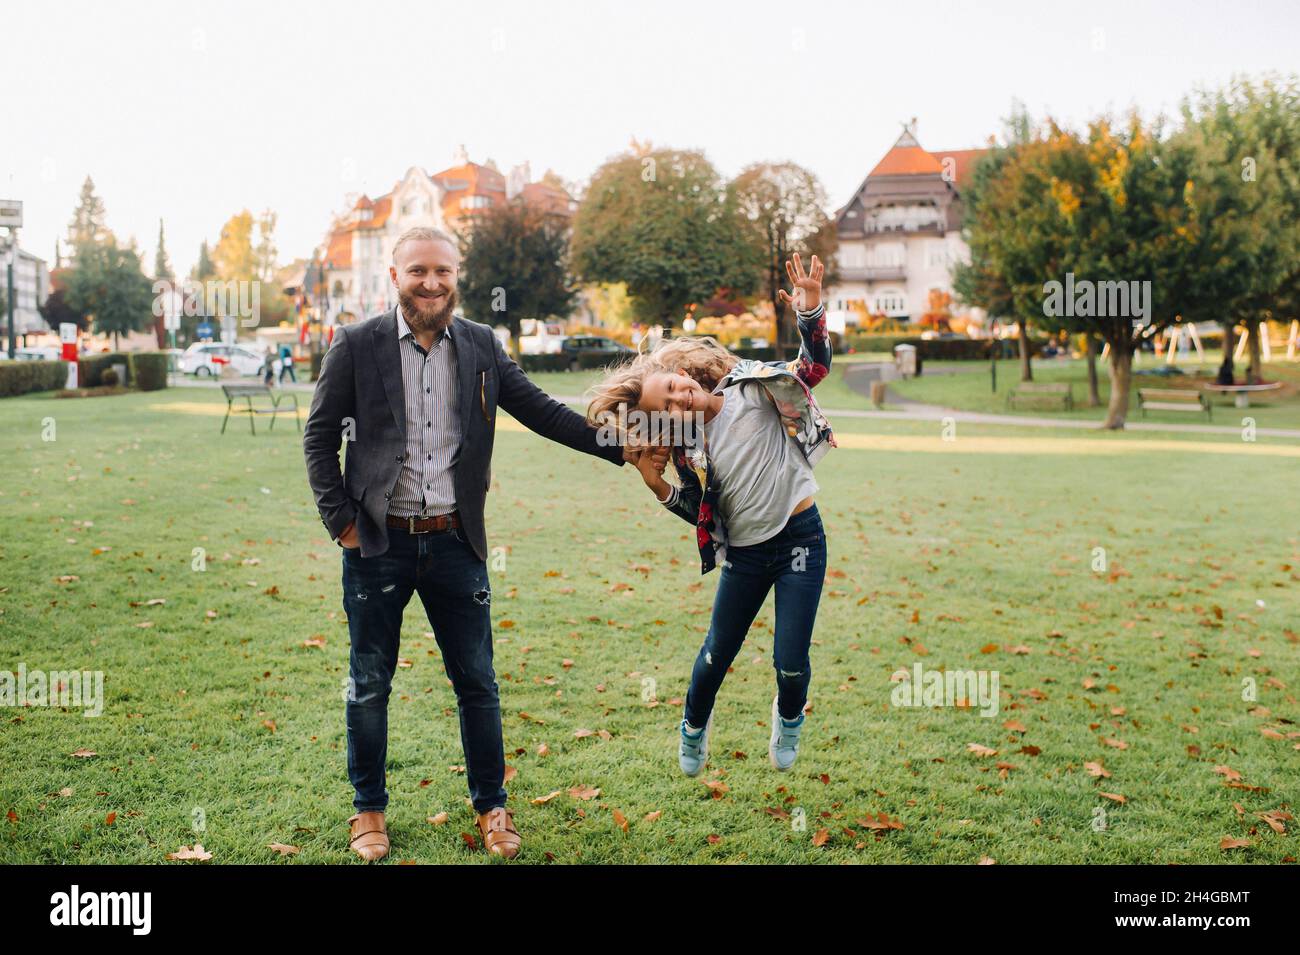 Father and daughter running on the grass in the old town of Austria.A family walks through a small town in Austria.Europe.Felden am Werten see. Stock Photo